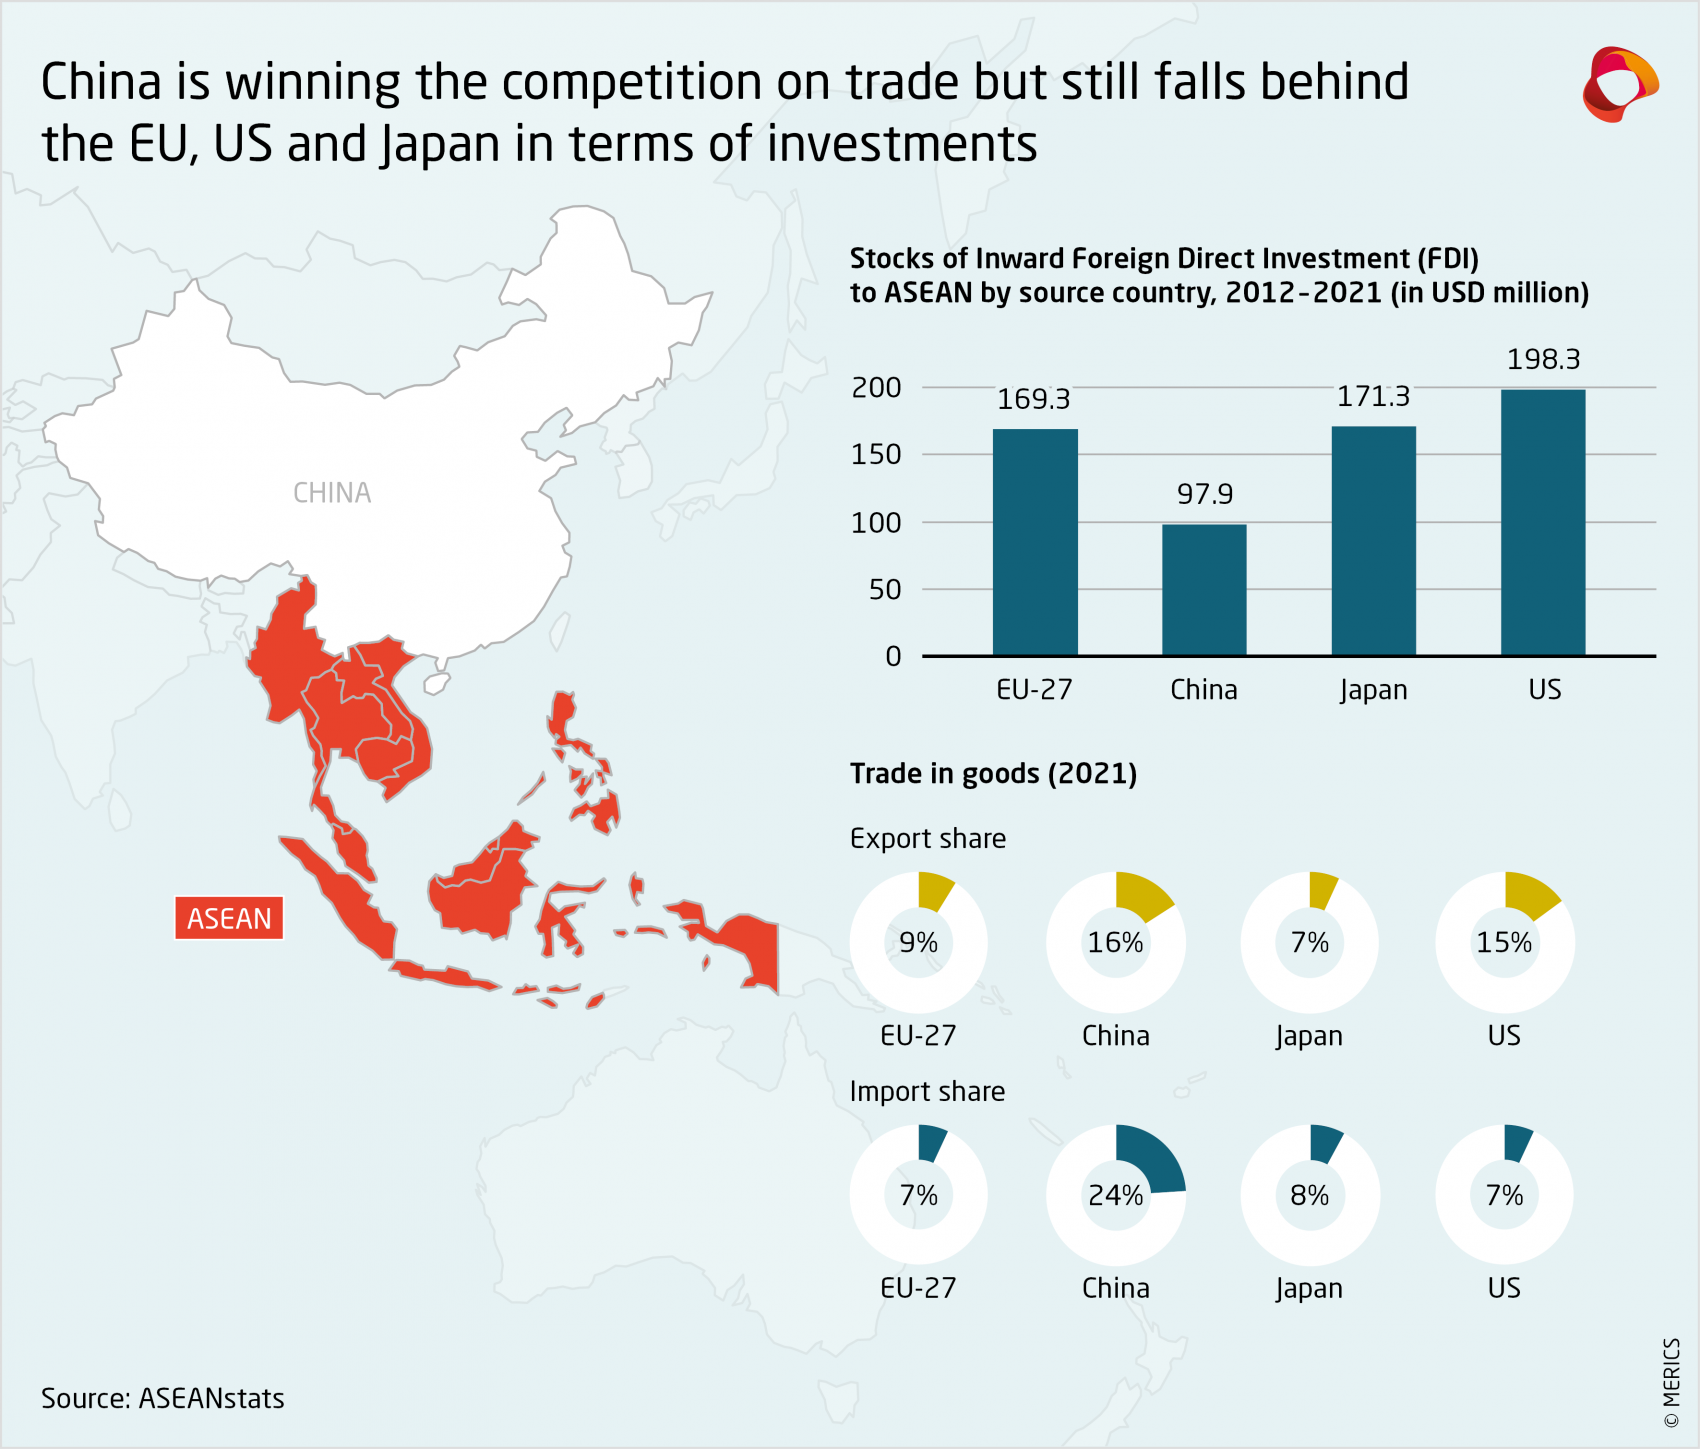 MERICS-China-Global-Competition-China-is-winning-competition-on-trade-but-still-falls-behind-EU-US-Japan-in-terms-of-investments